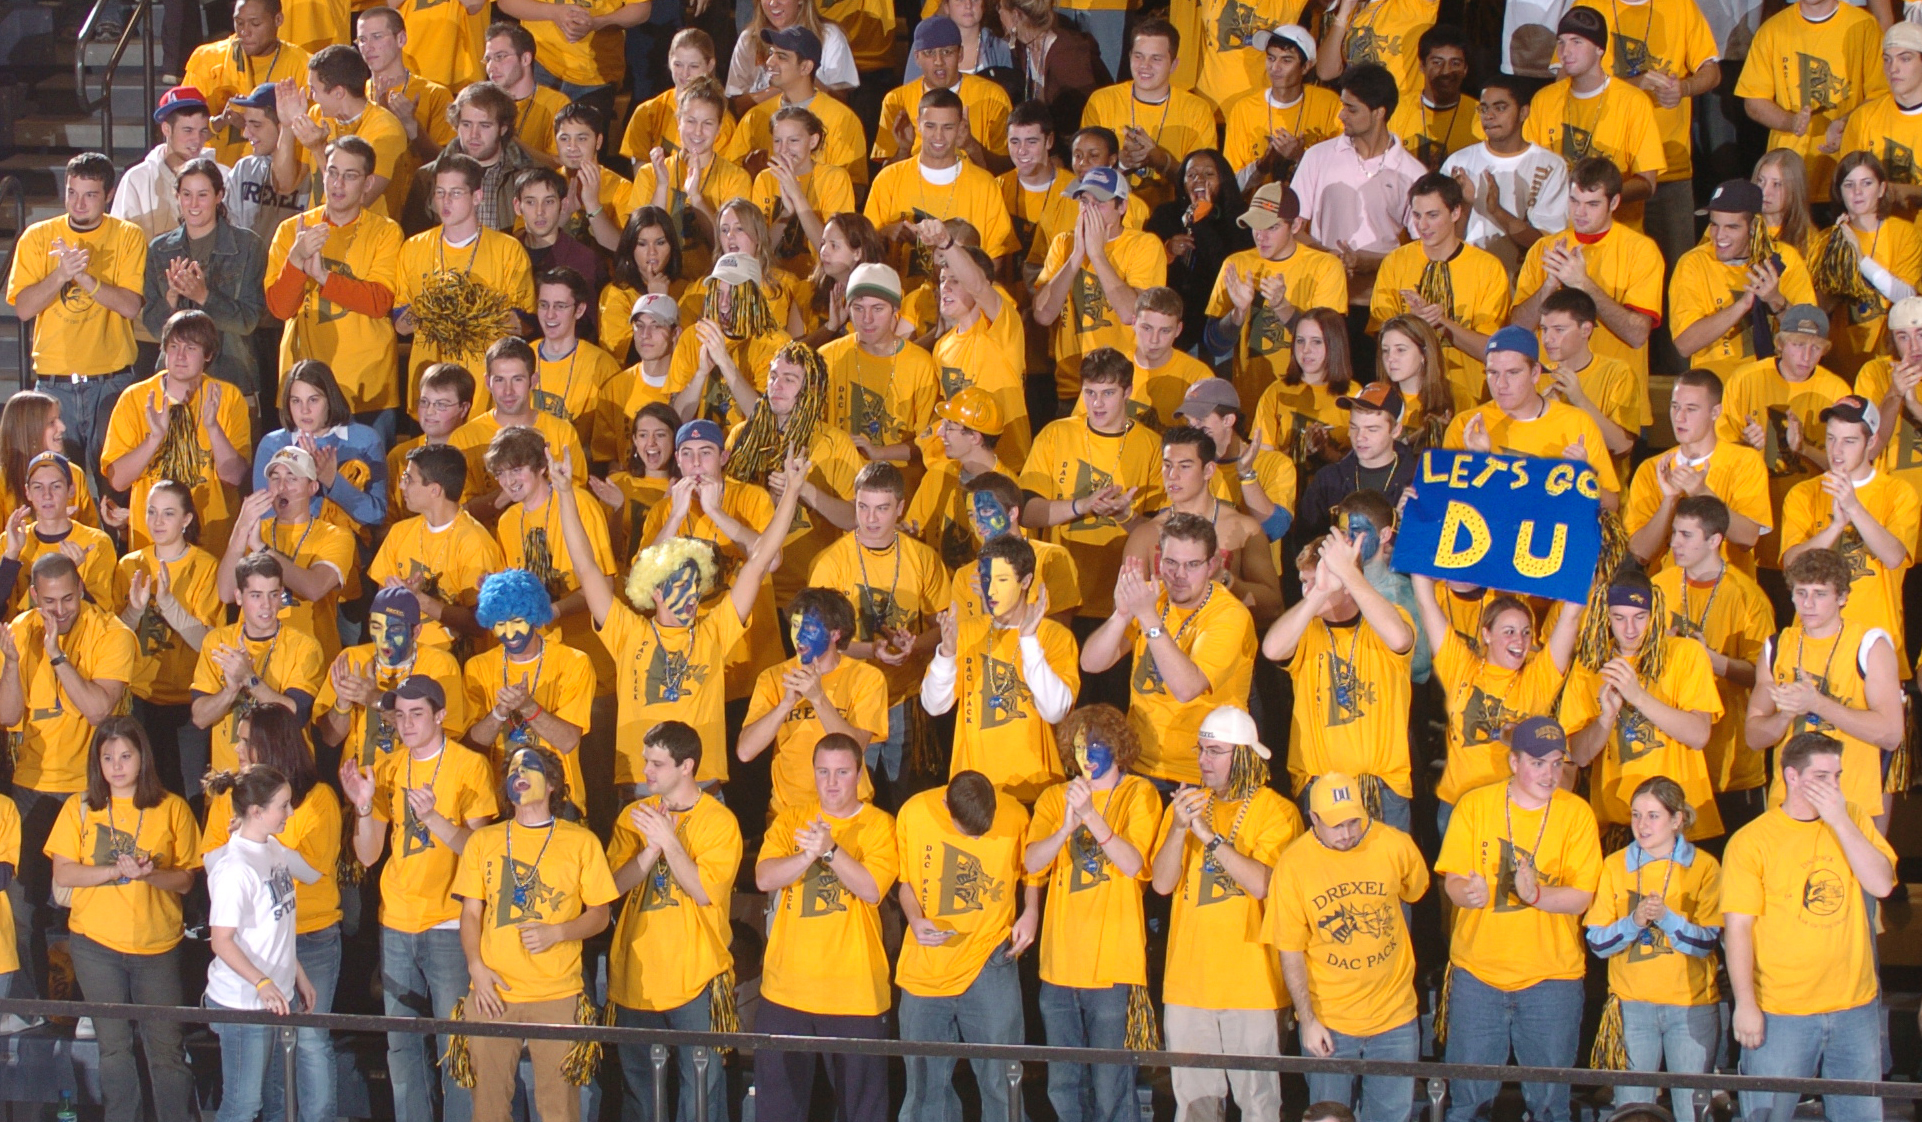 Drexel students at a basketball game